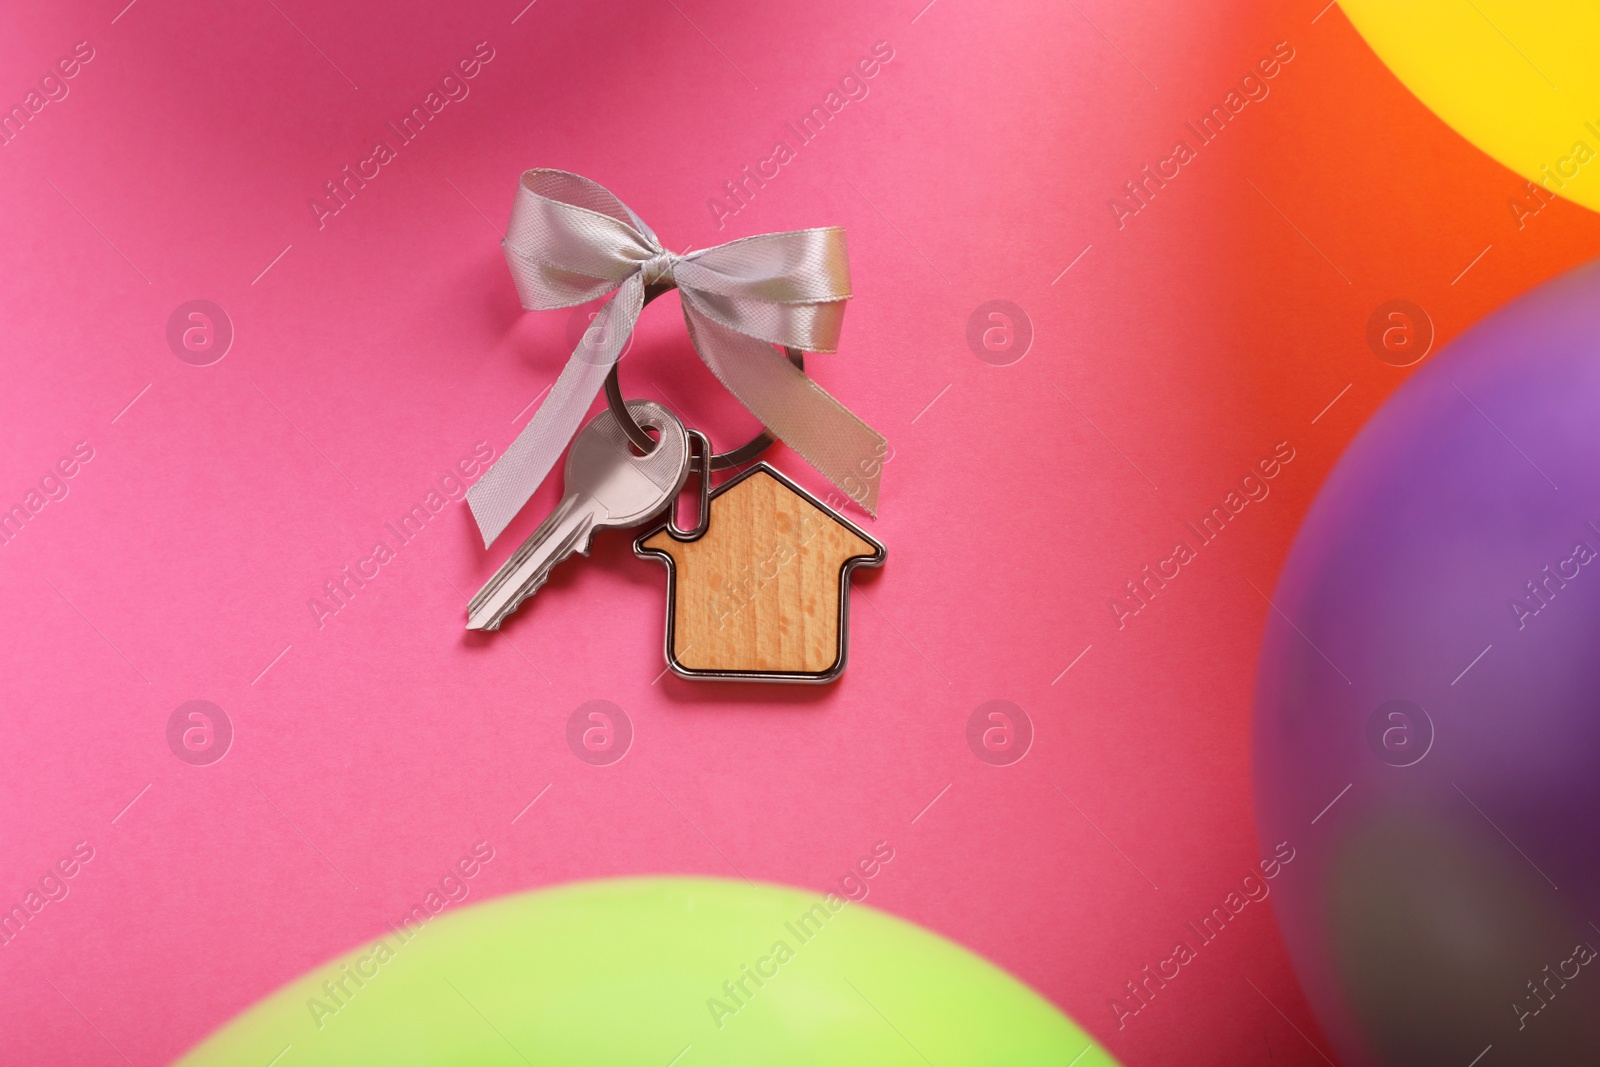 Photo of Key with trinket in shape of house and bow on pink background near color balloons, flat lay. Housewarming party